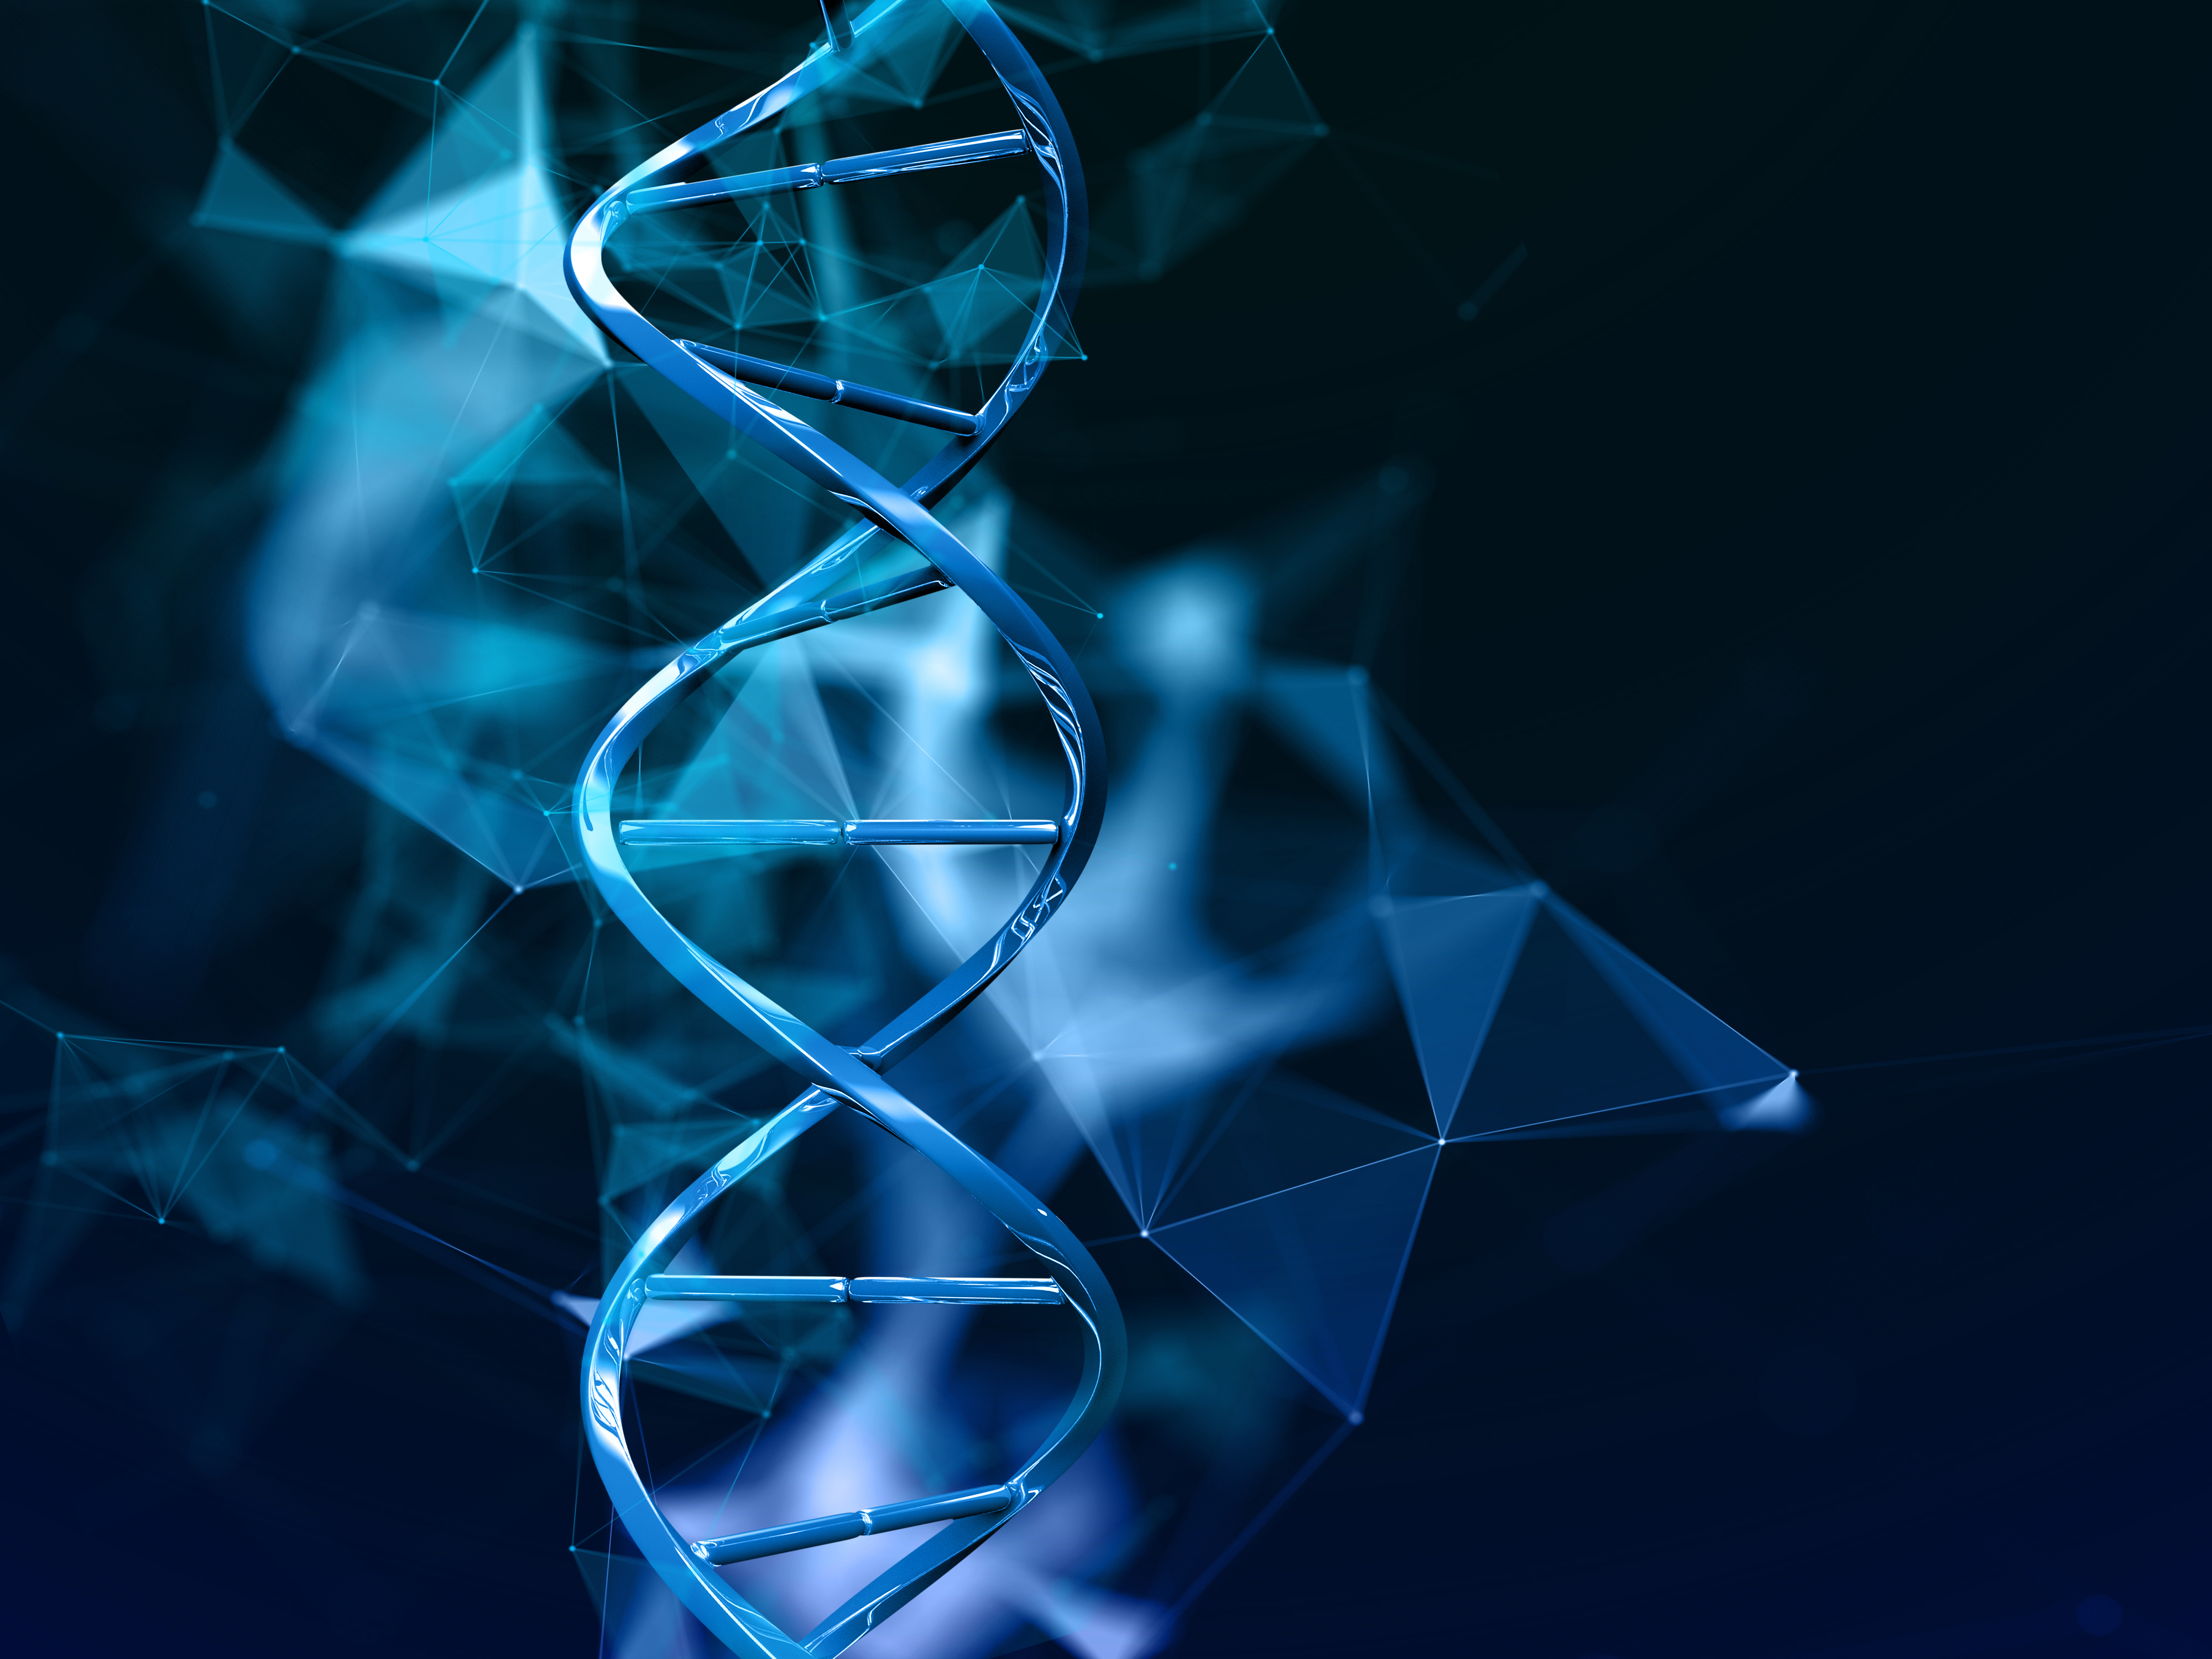 Epigenomic editing: A promising new frontier for biotech investors in 2023 and beyond